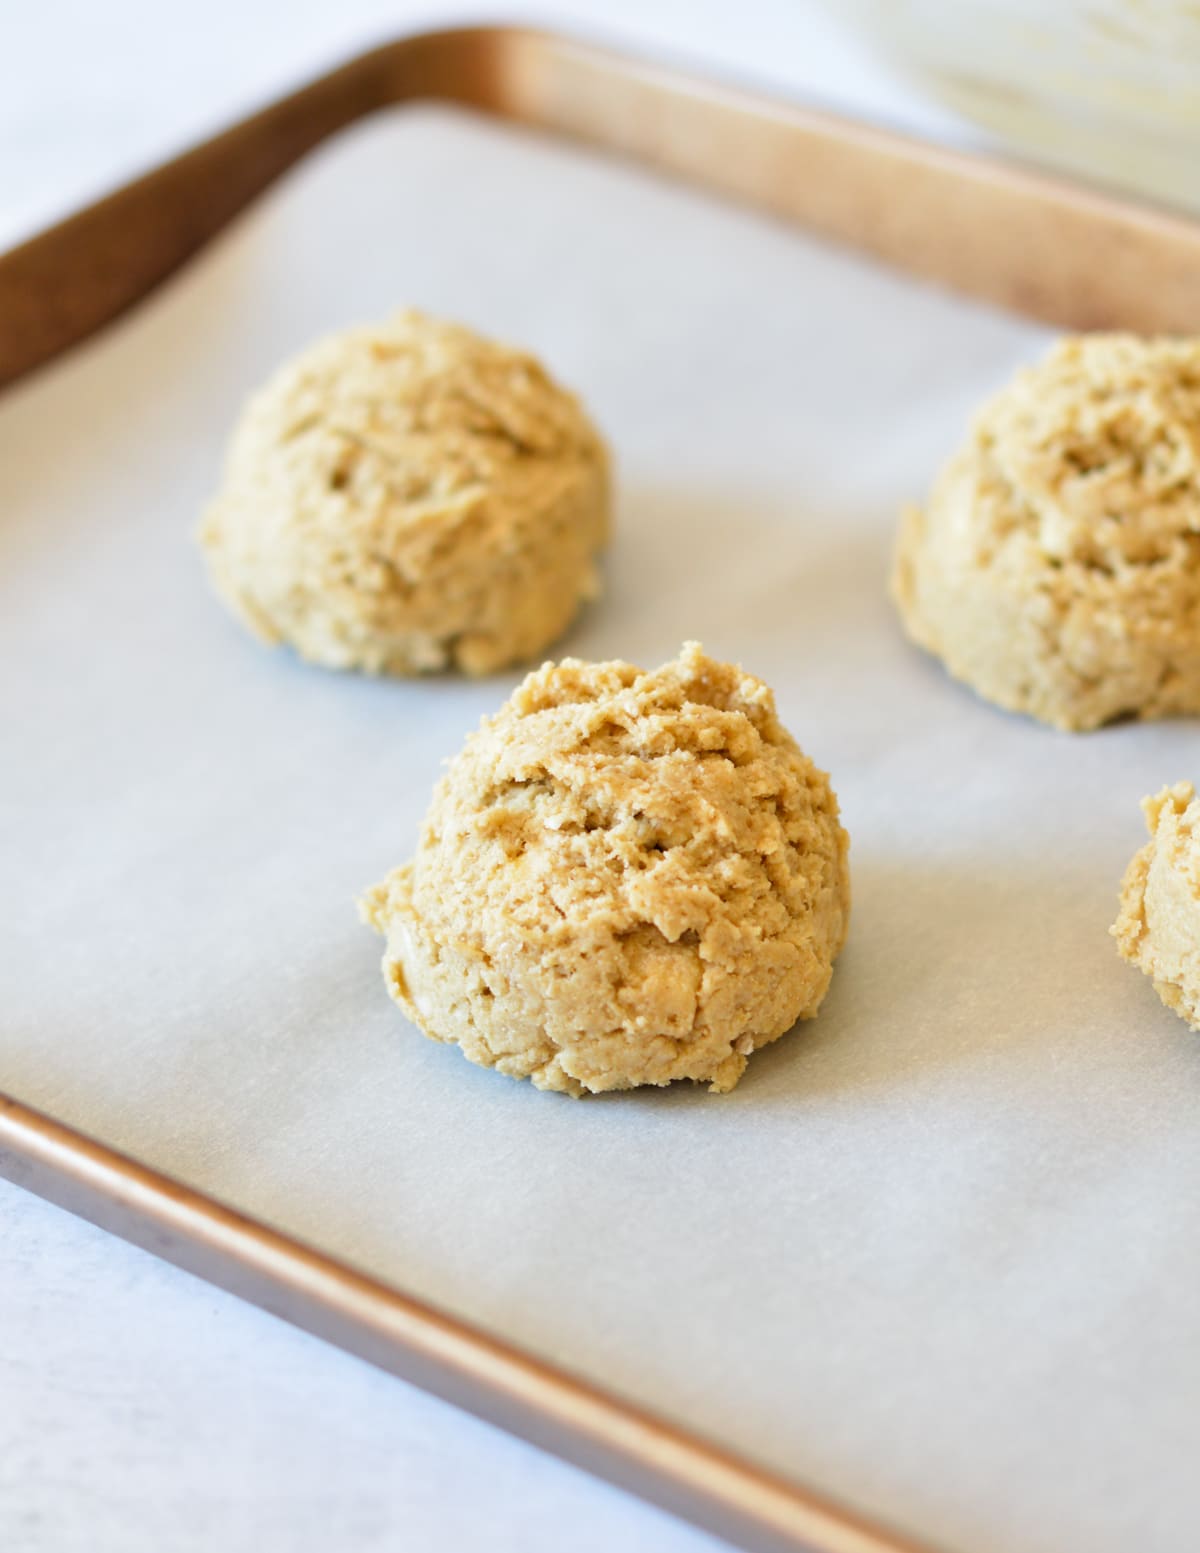 unbaked oat flour drop biscuits on a parchment lined sheet pan.